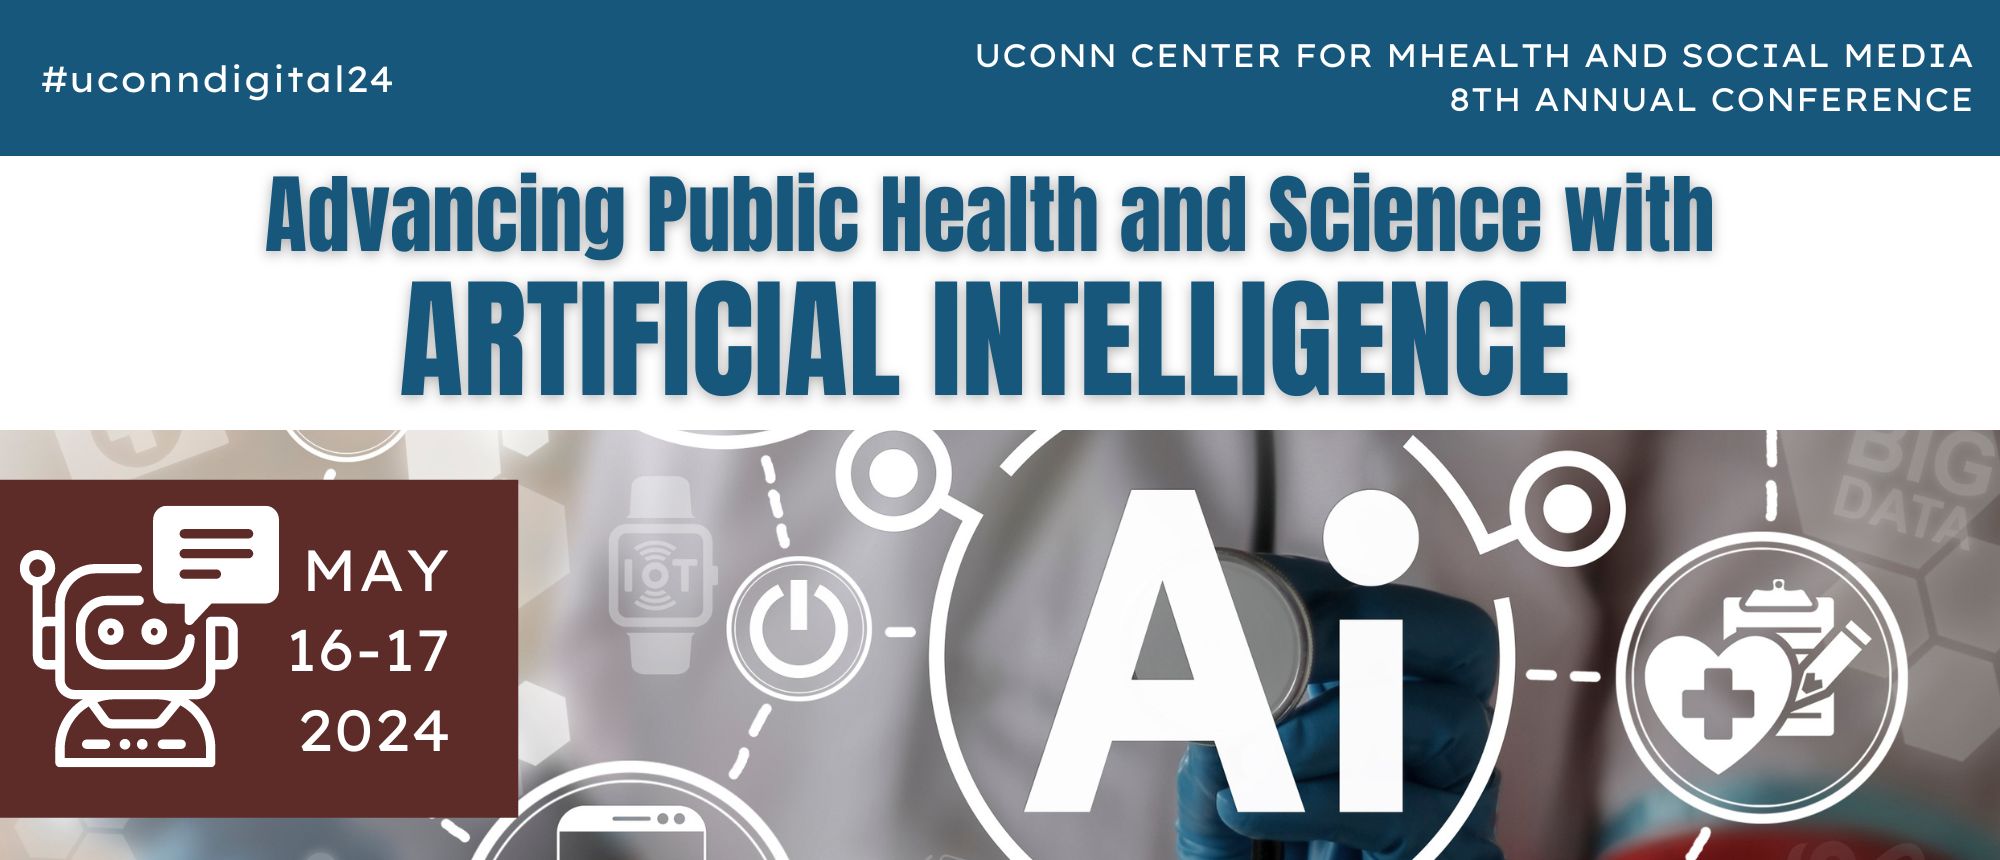 8th Annual Conference: Advancing Public Health and Science with Artificial Intelligence